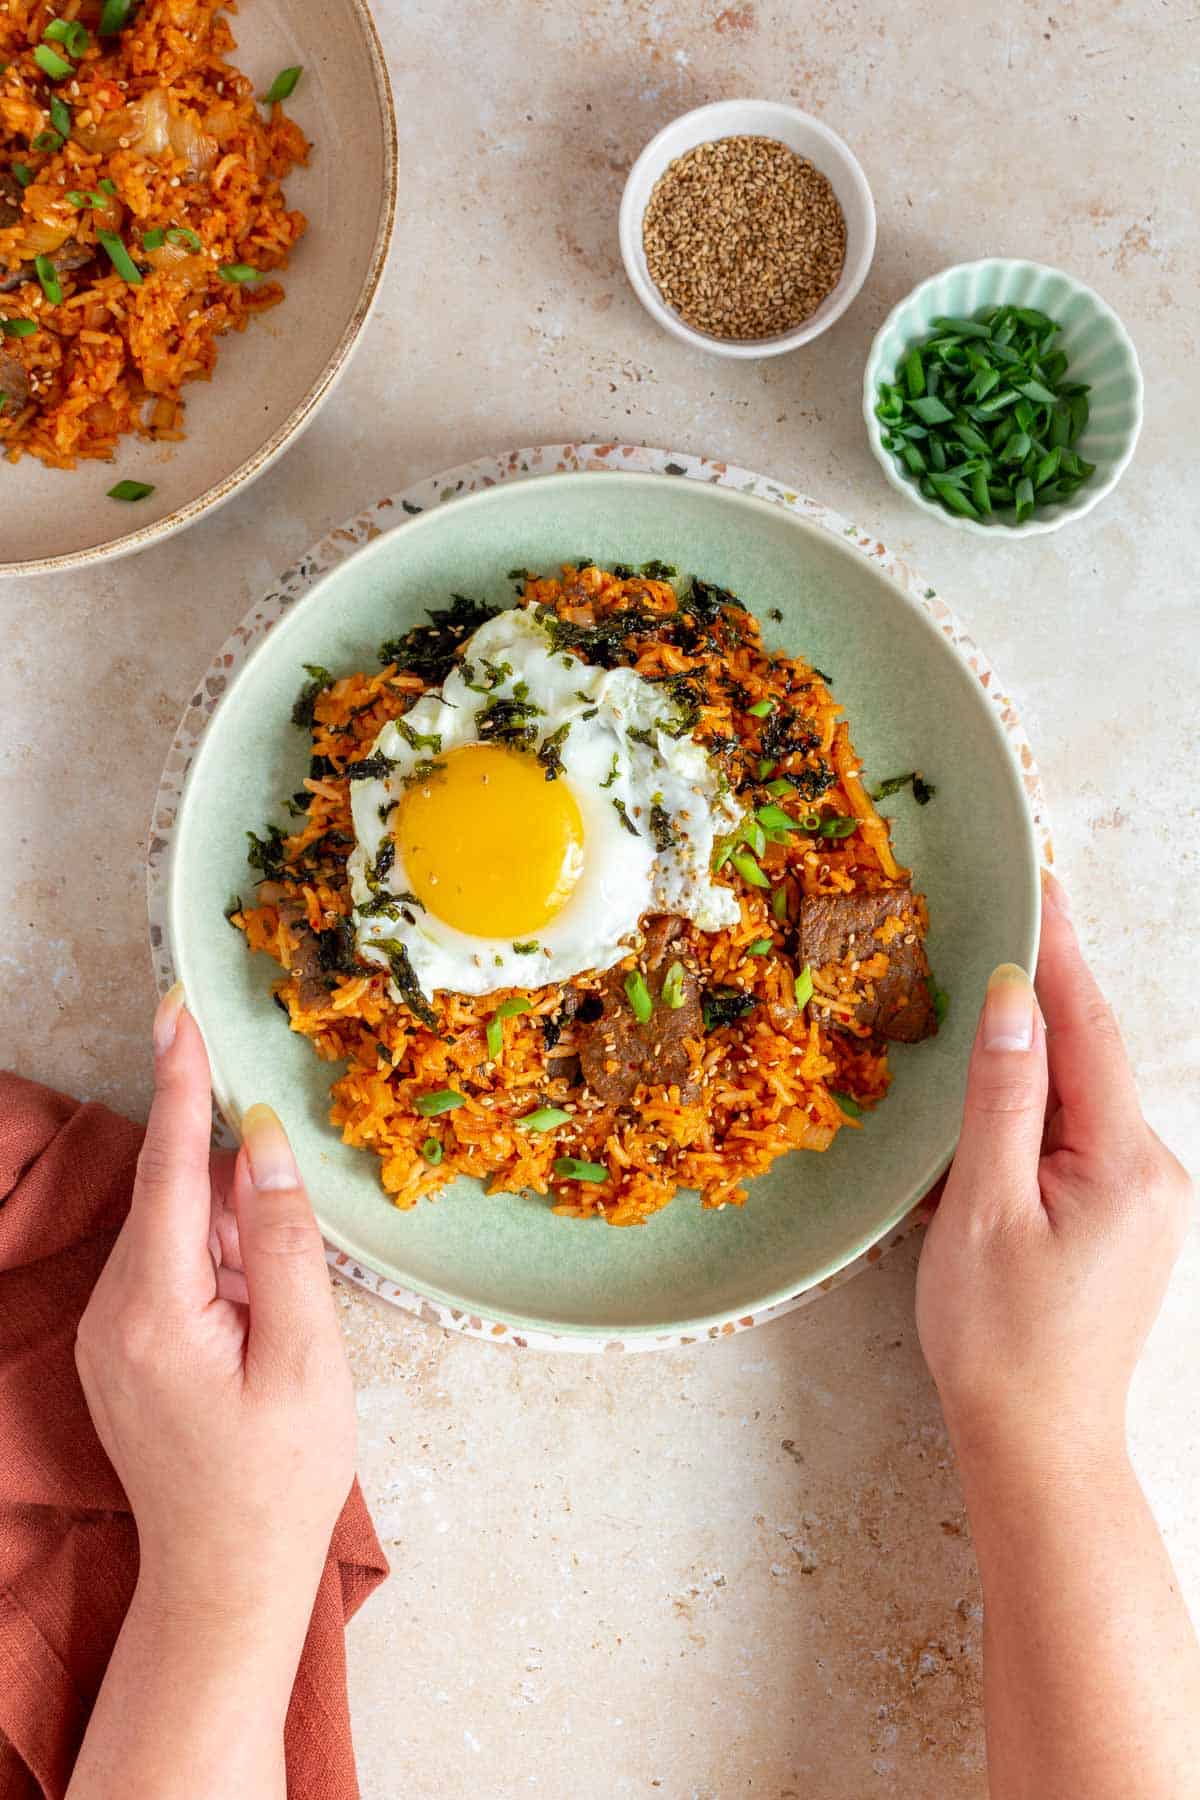 A plate of gochujang fried rice topped with seaweed and egg being held by a hand.